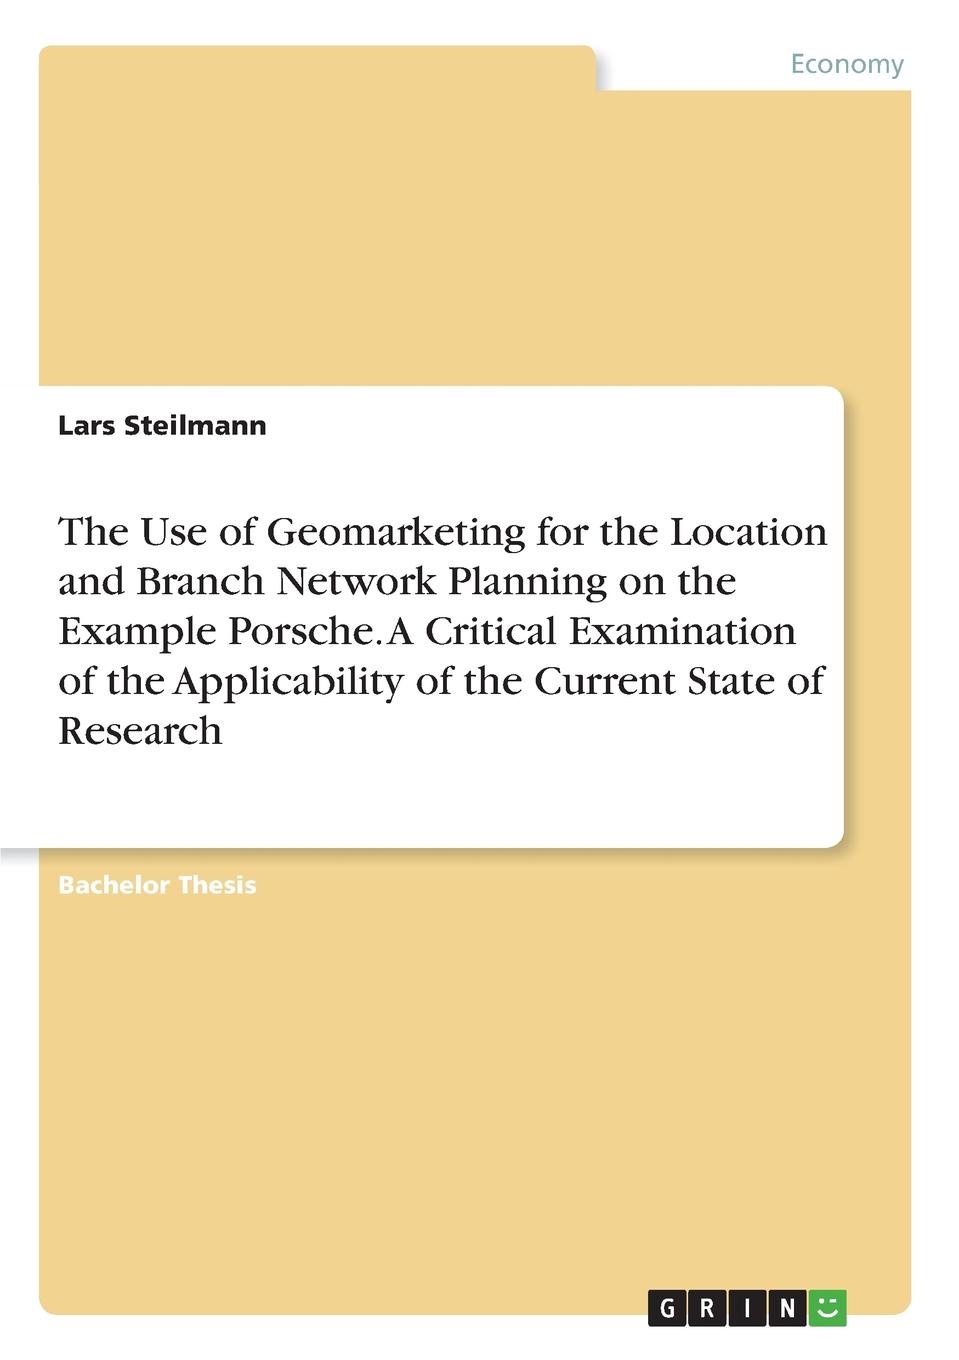 The Use of Geomarketing for the Location and Branch Network Planning on the Example Porsche. A Critical Examination of the Applicability of the Current State of Research